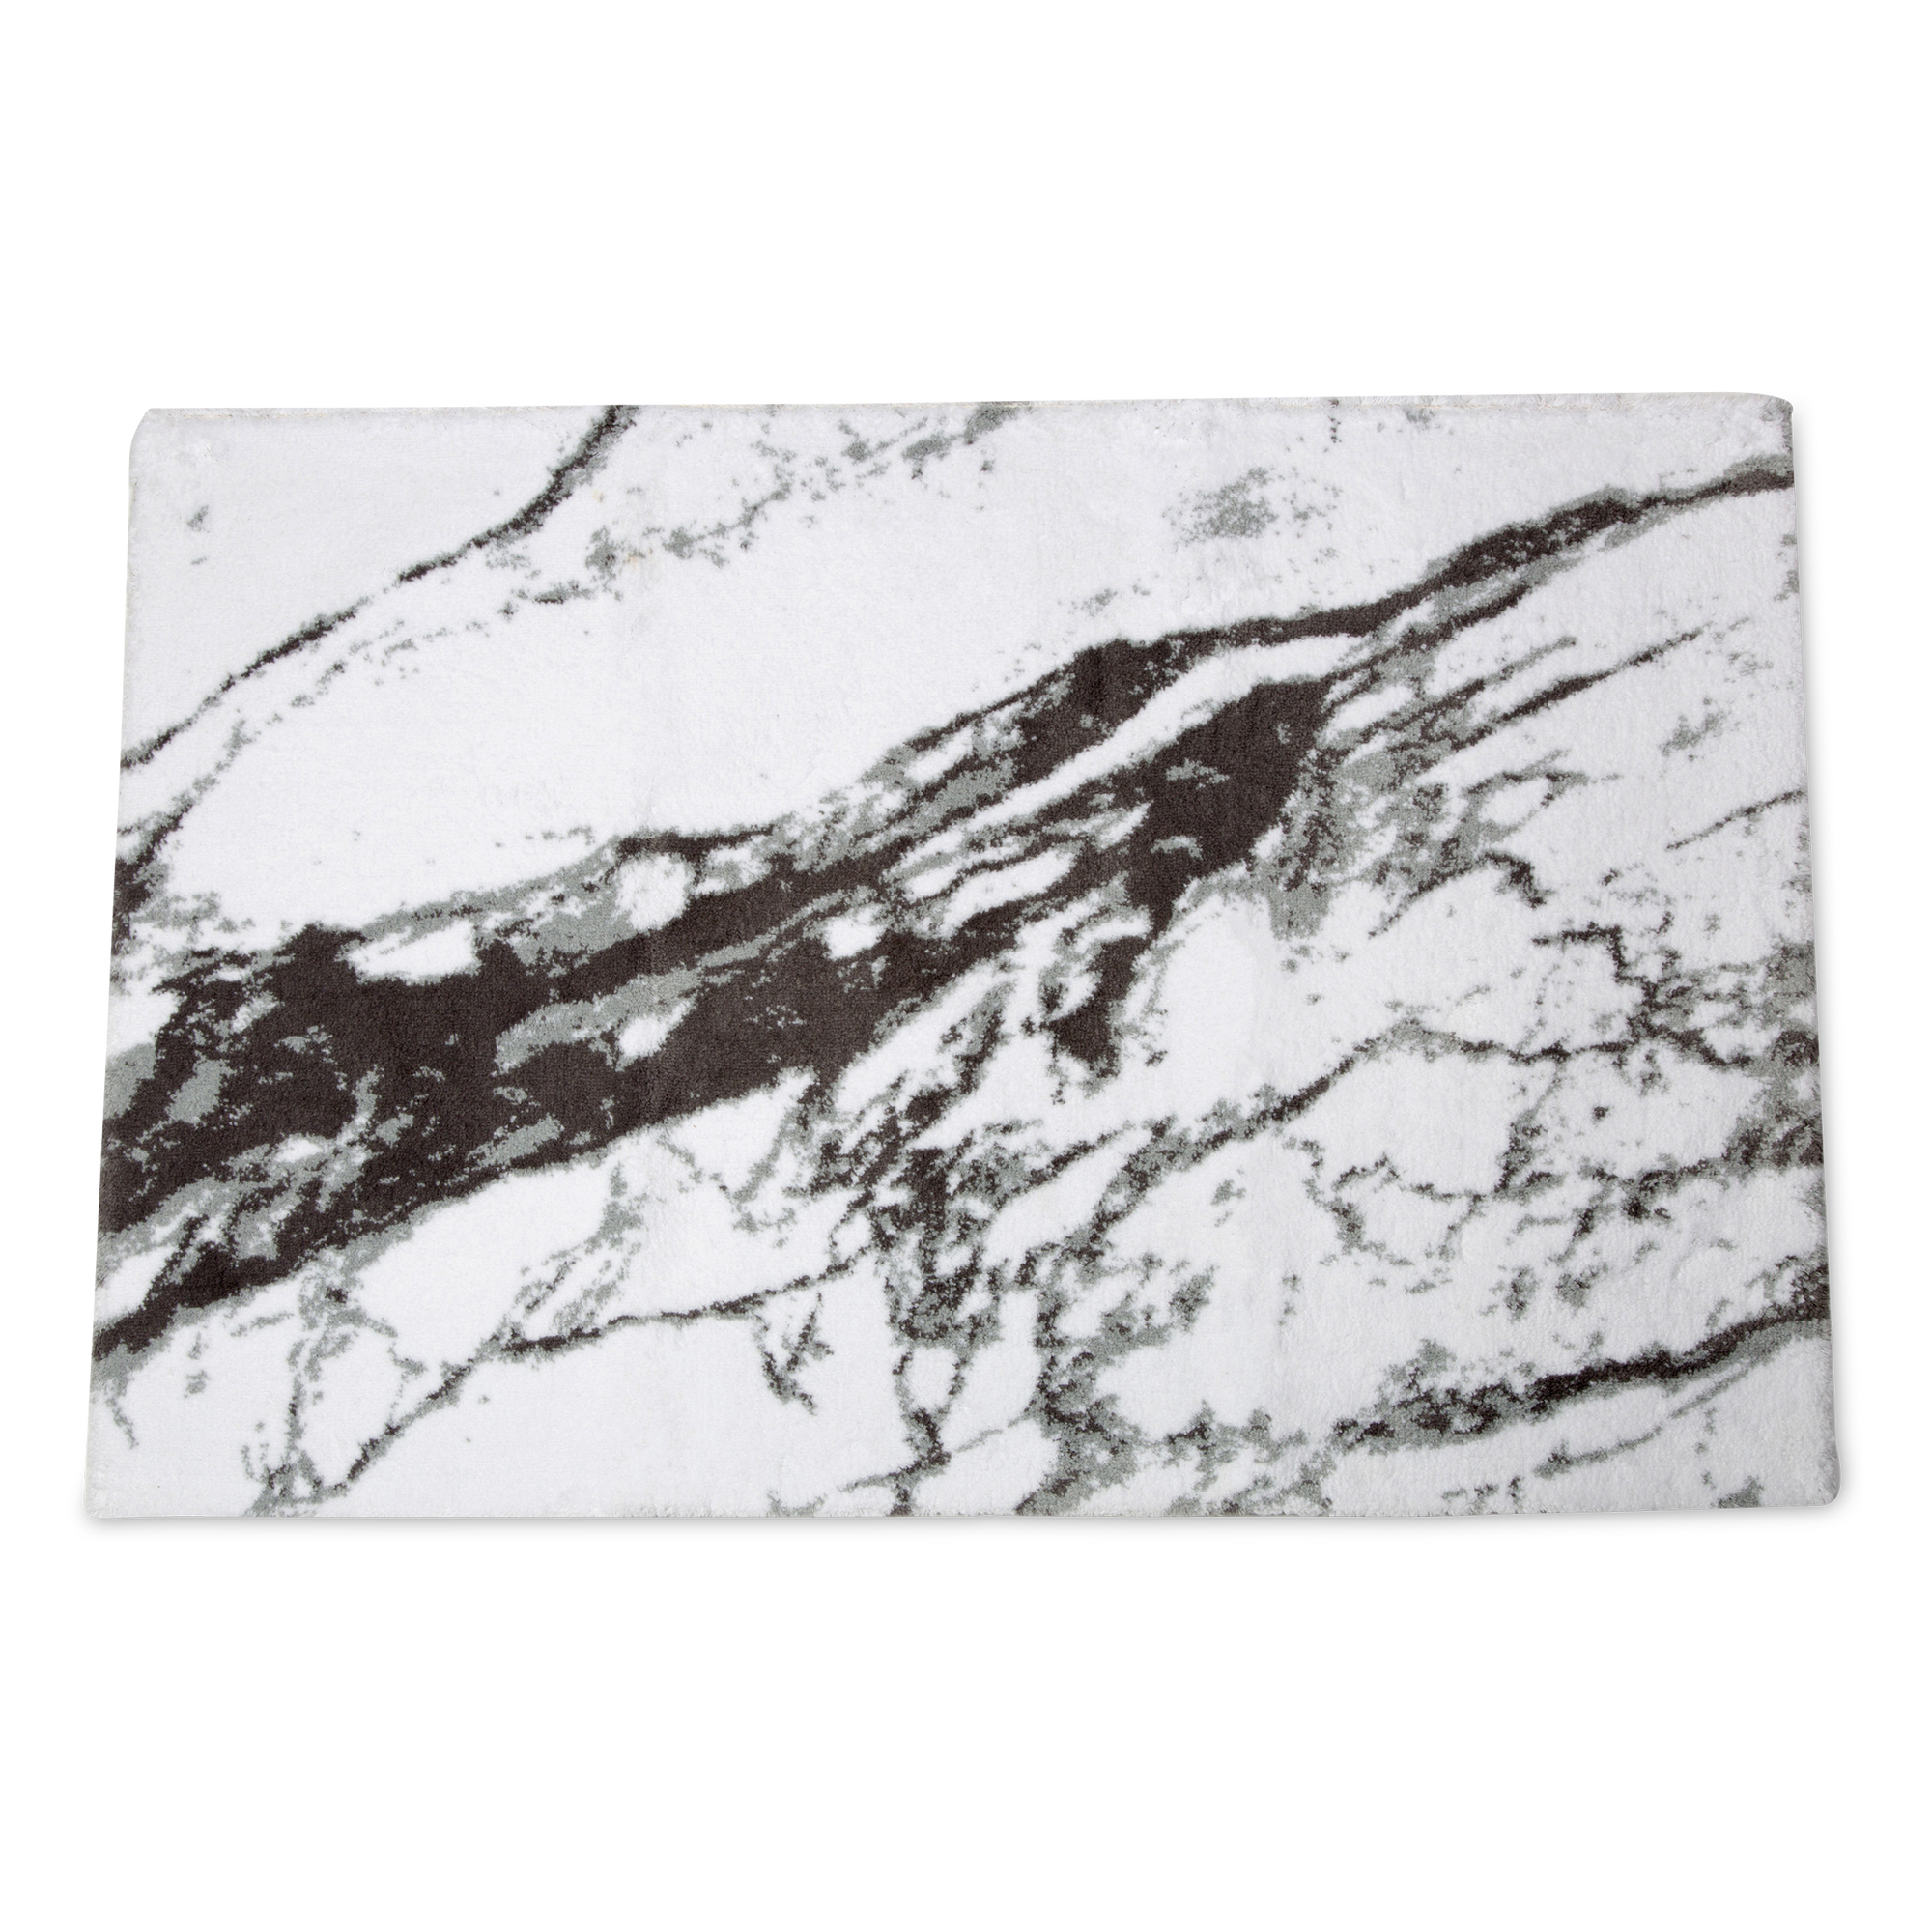 This 100% cotton bath rug has a marble motif design for a little bit of extra texture and comfort underfoot.